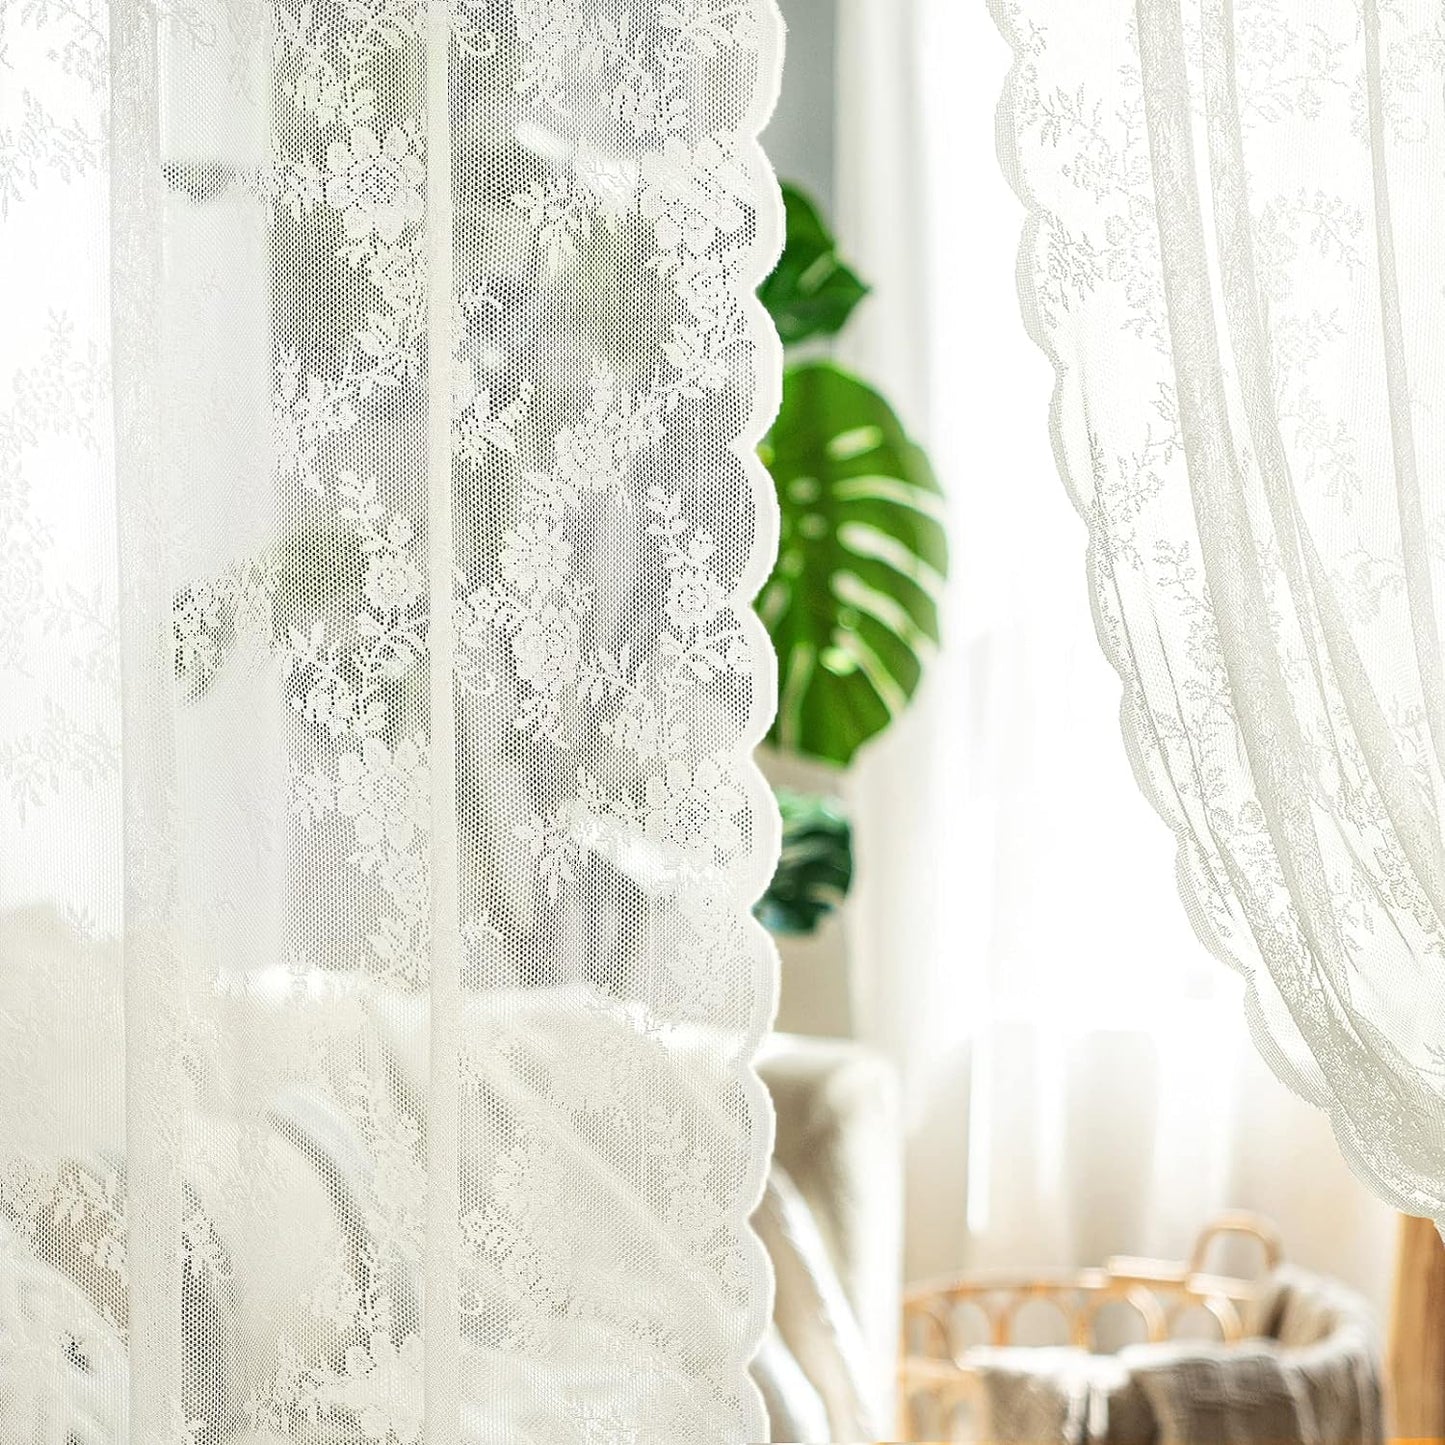 MIULEE White Lace Curtains 84 Inches Long for Living Room Bedroom, Scalloped Sheer Curtains Rose Floral Embroidered Farmhouse Window Drapes Vintage European Tulle Retro Style, Rod Pocket, 2 Panels Set  MIULEE Ivory 58 W X 84 L 